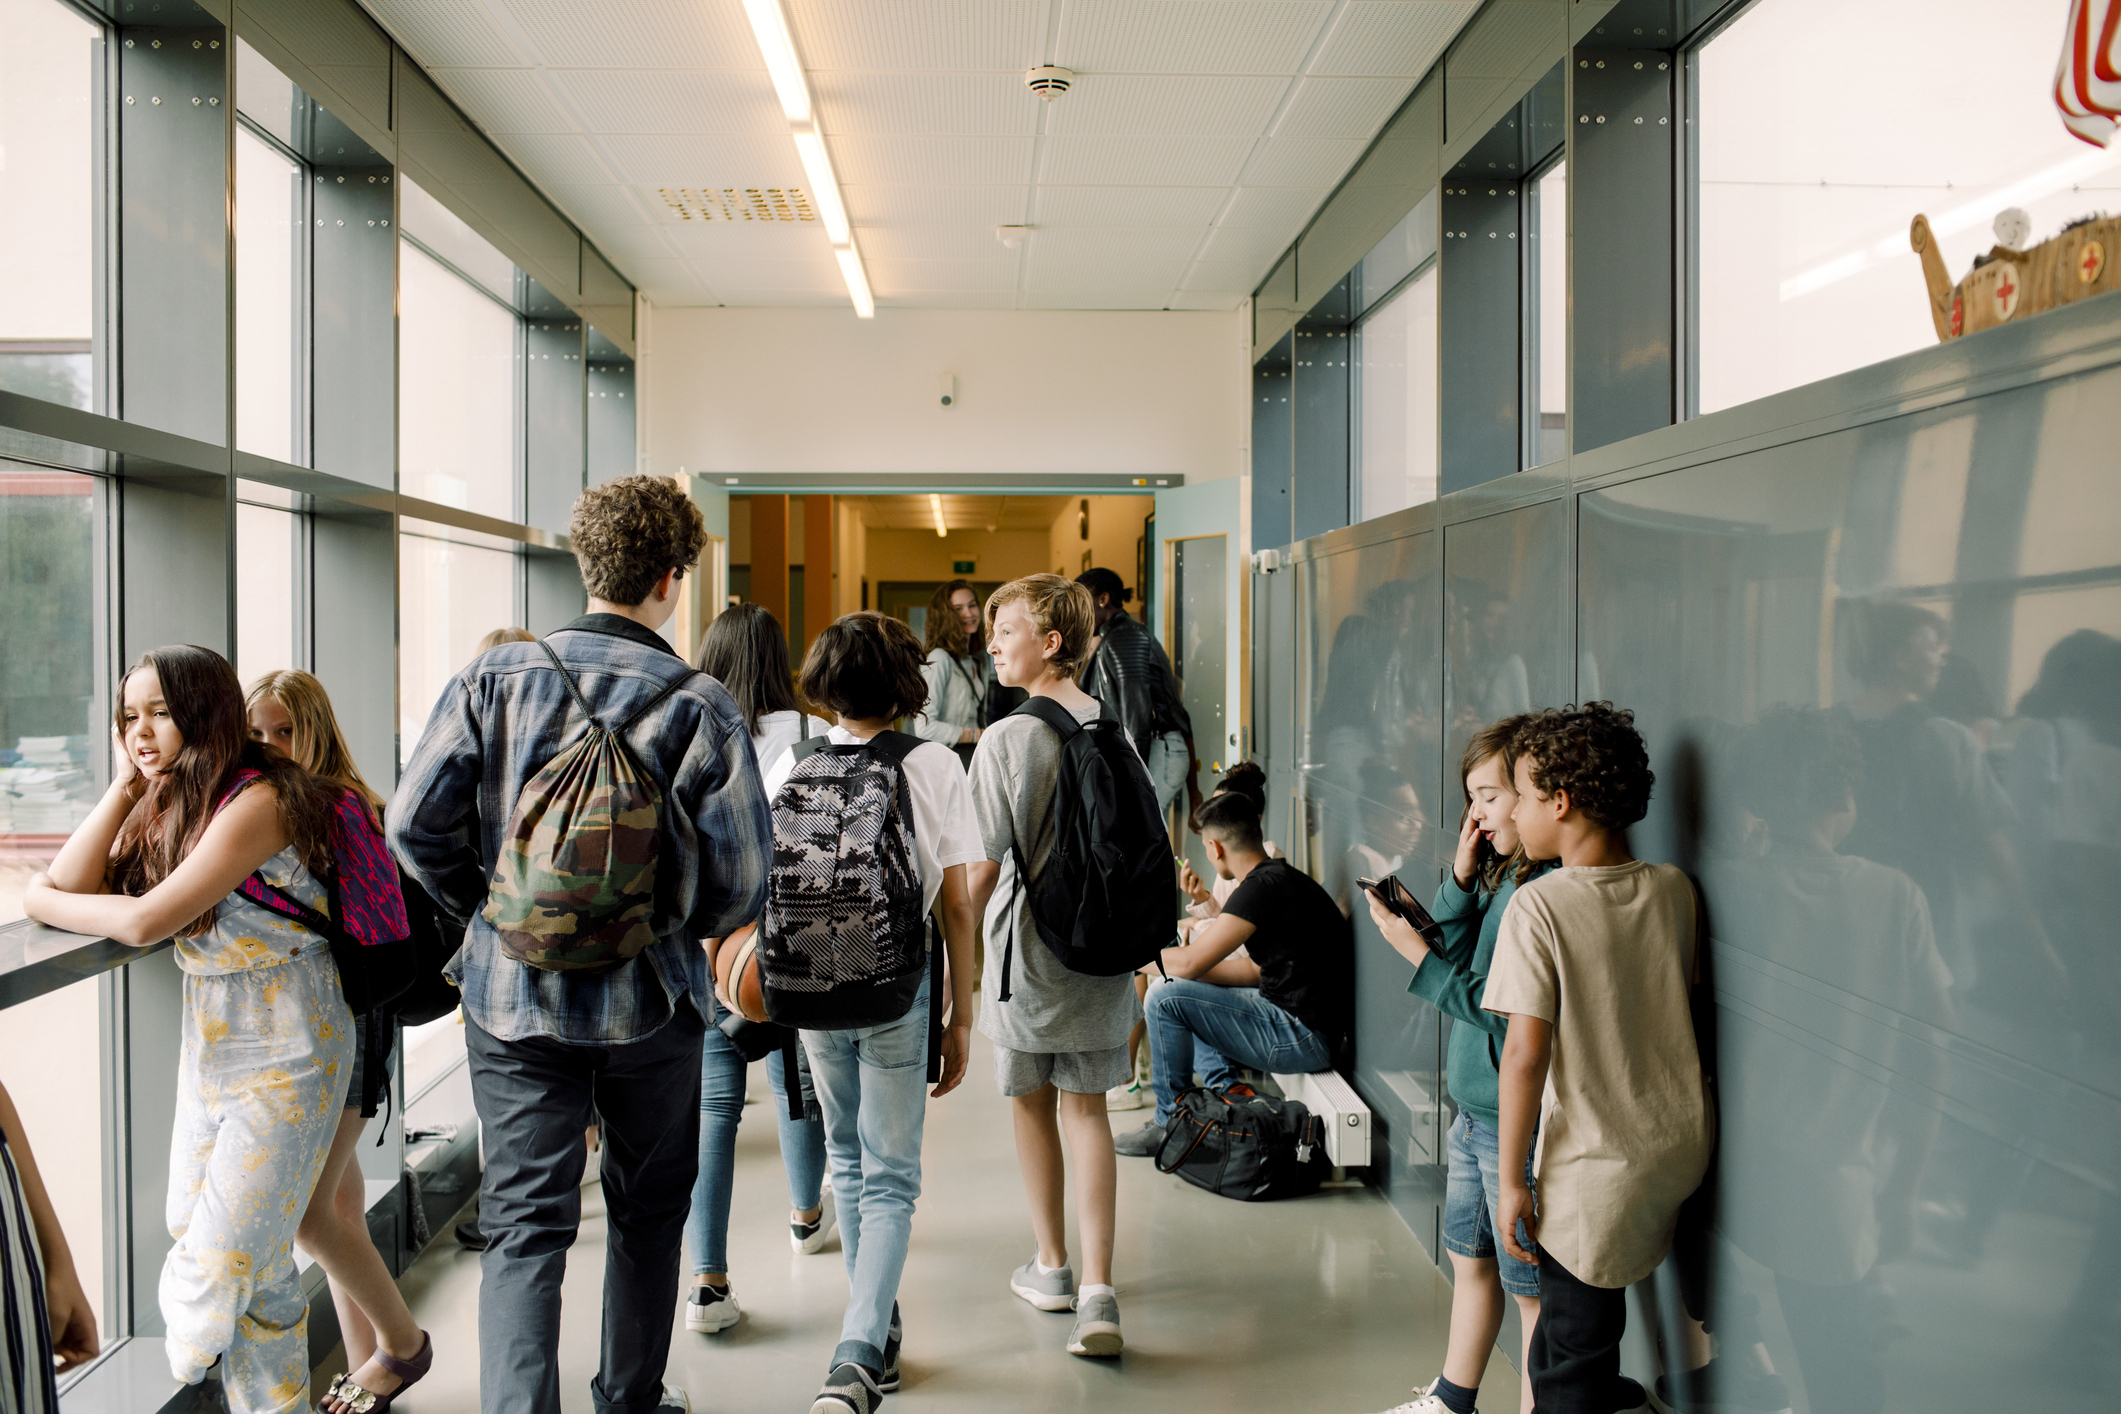 Students in a hallway interacting and accessing lockers